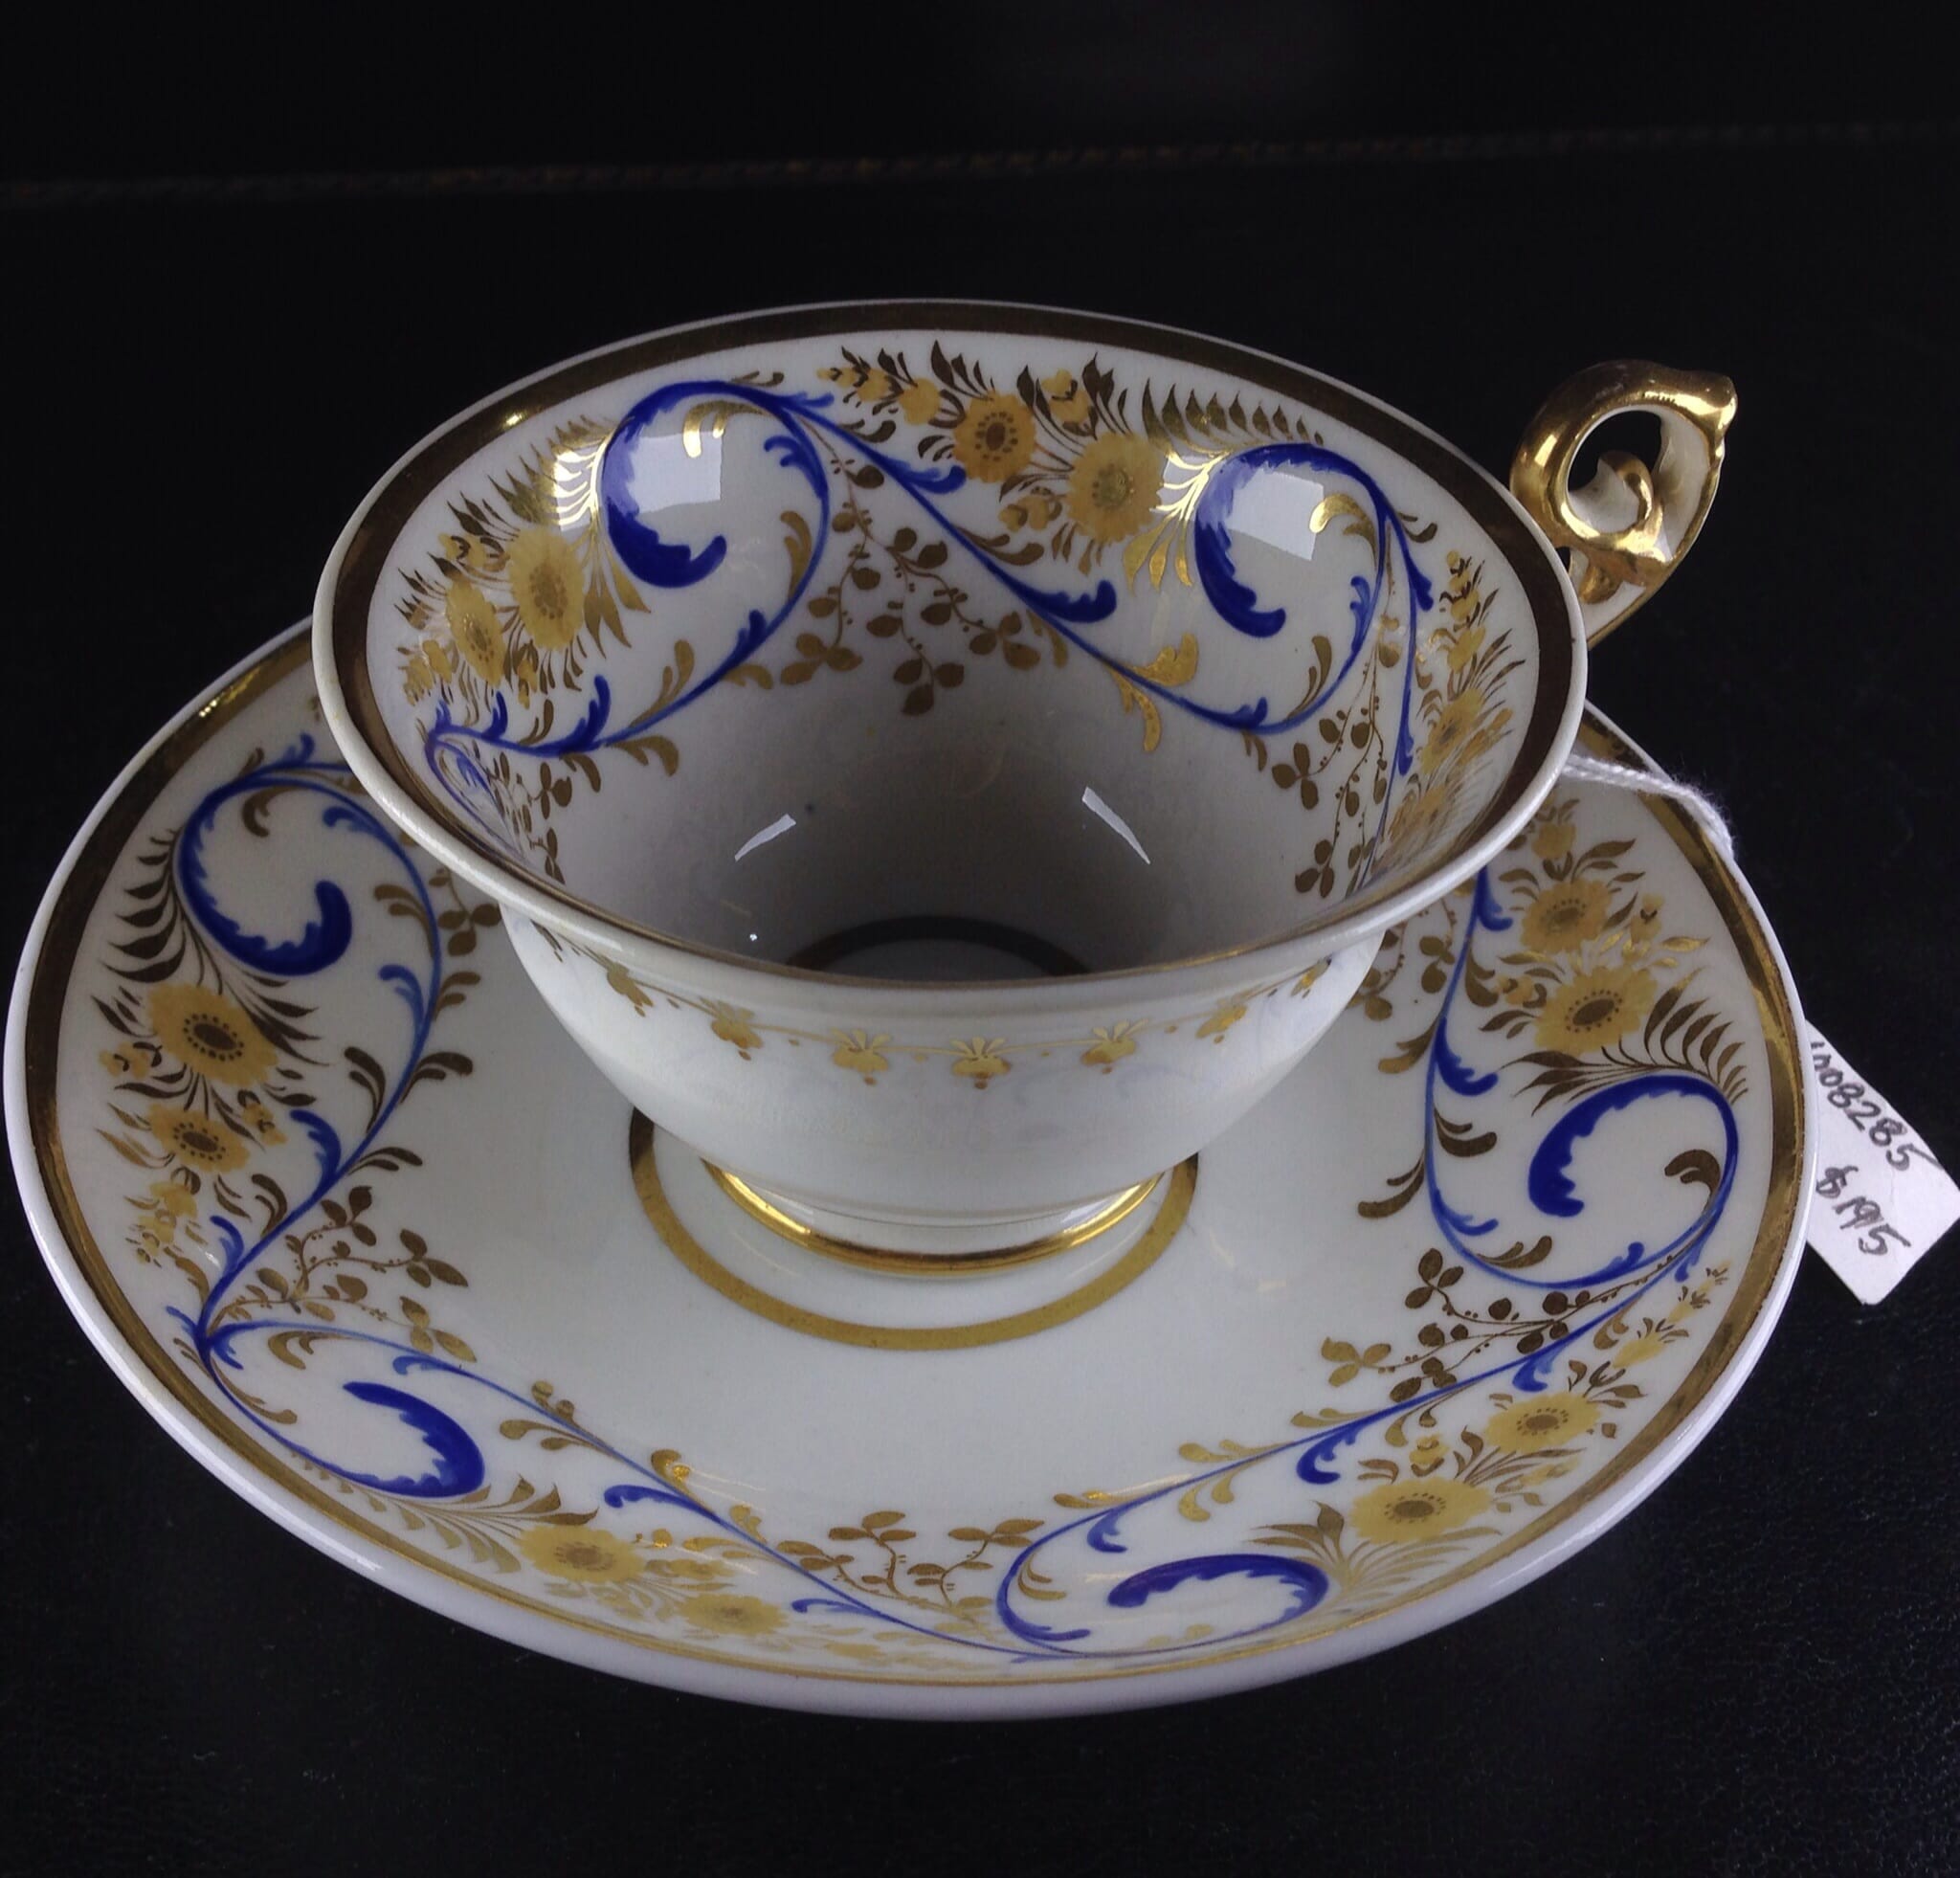 Daniel cup & saucer, painted with flowers, Ex- Lynne Price collection, C. 1835-0